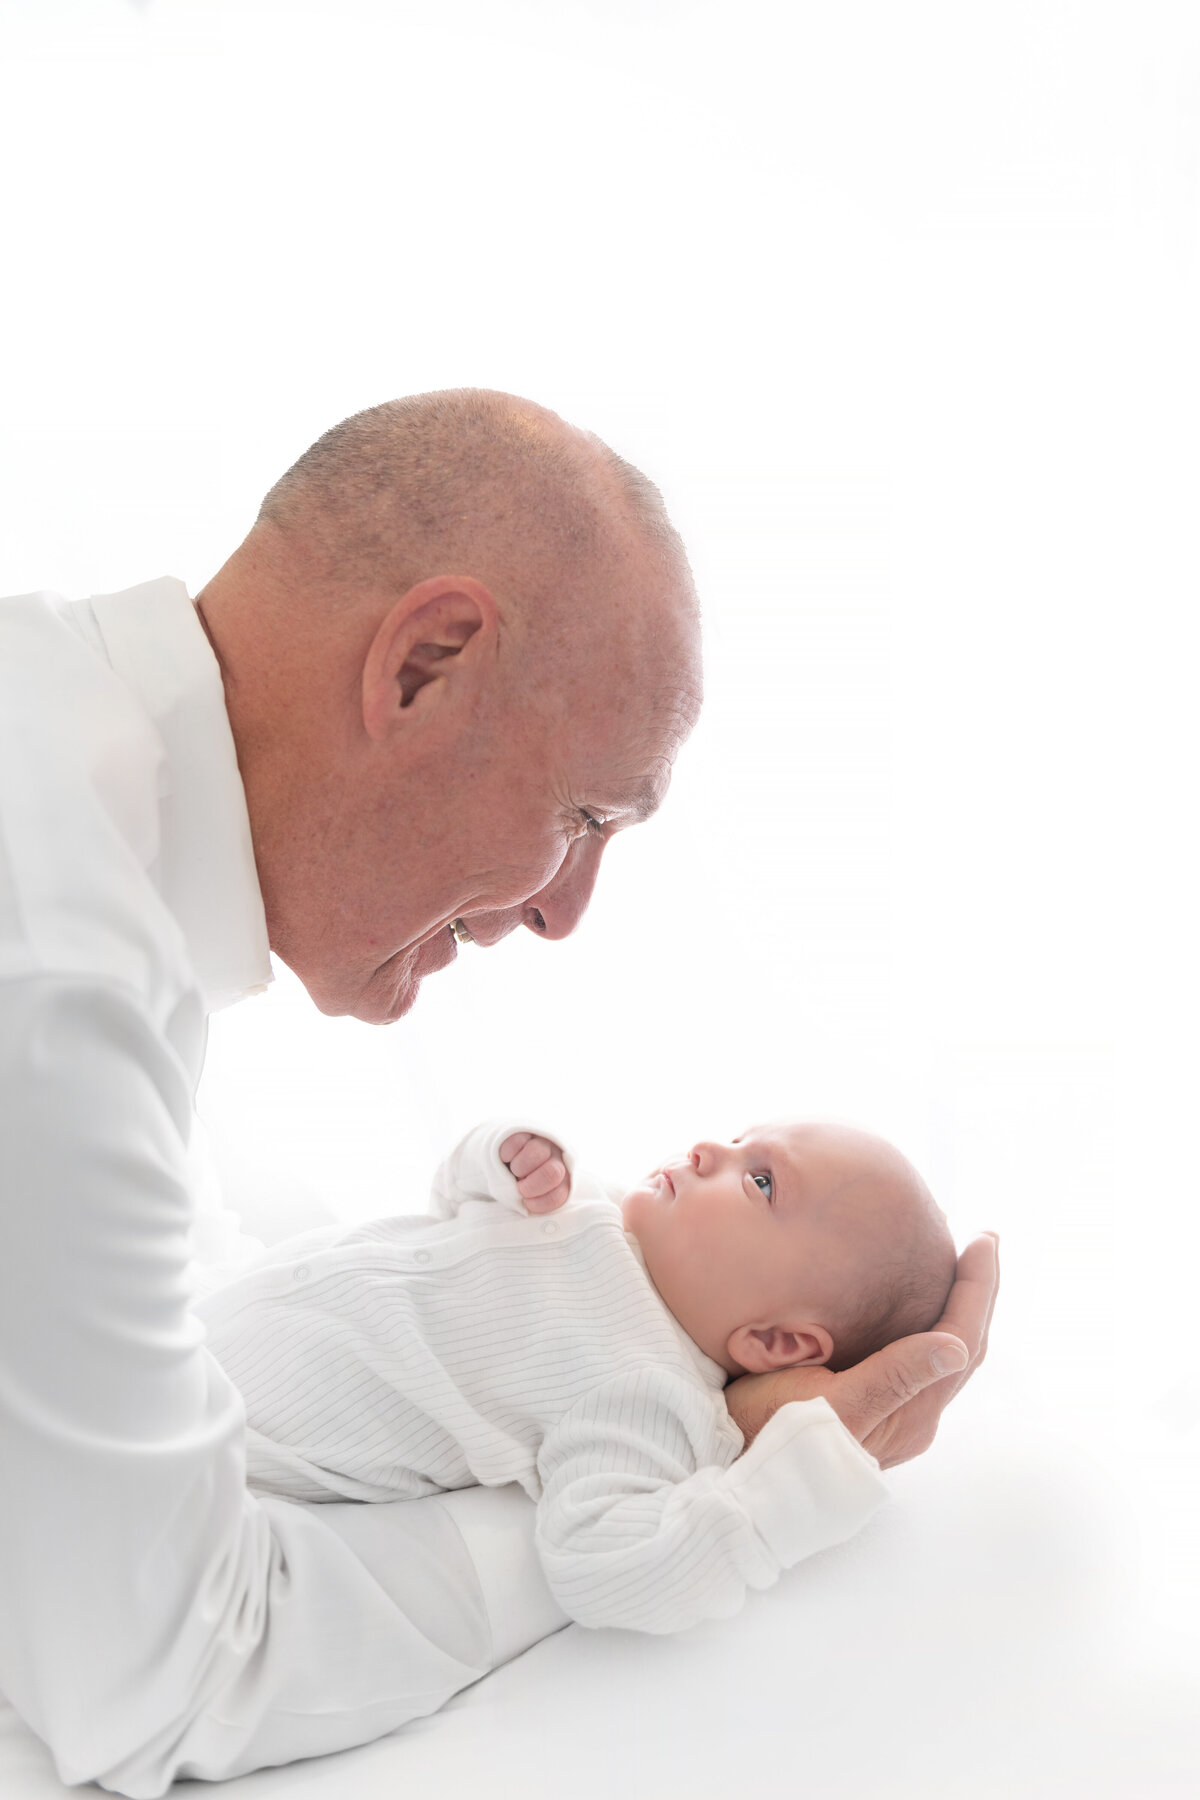 A man in a white shirt smiles down at a newborn baby looking up at him from his arms